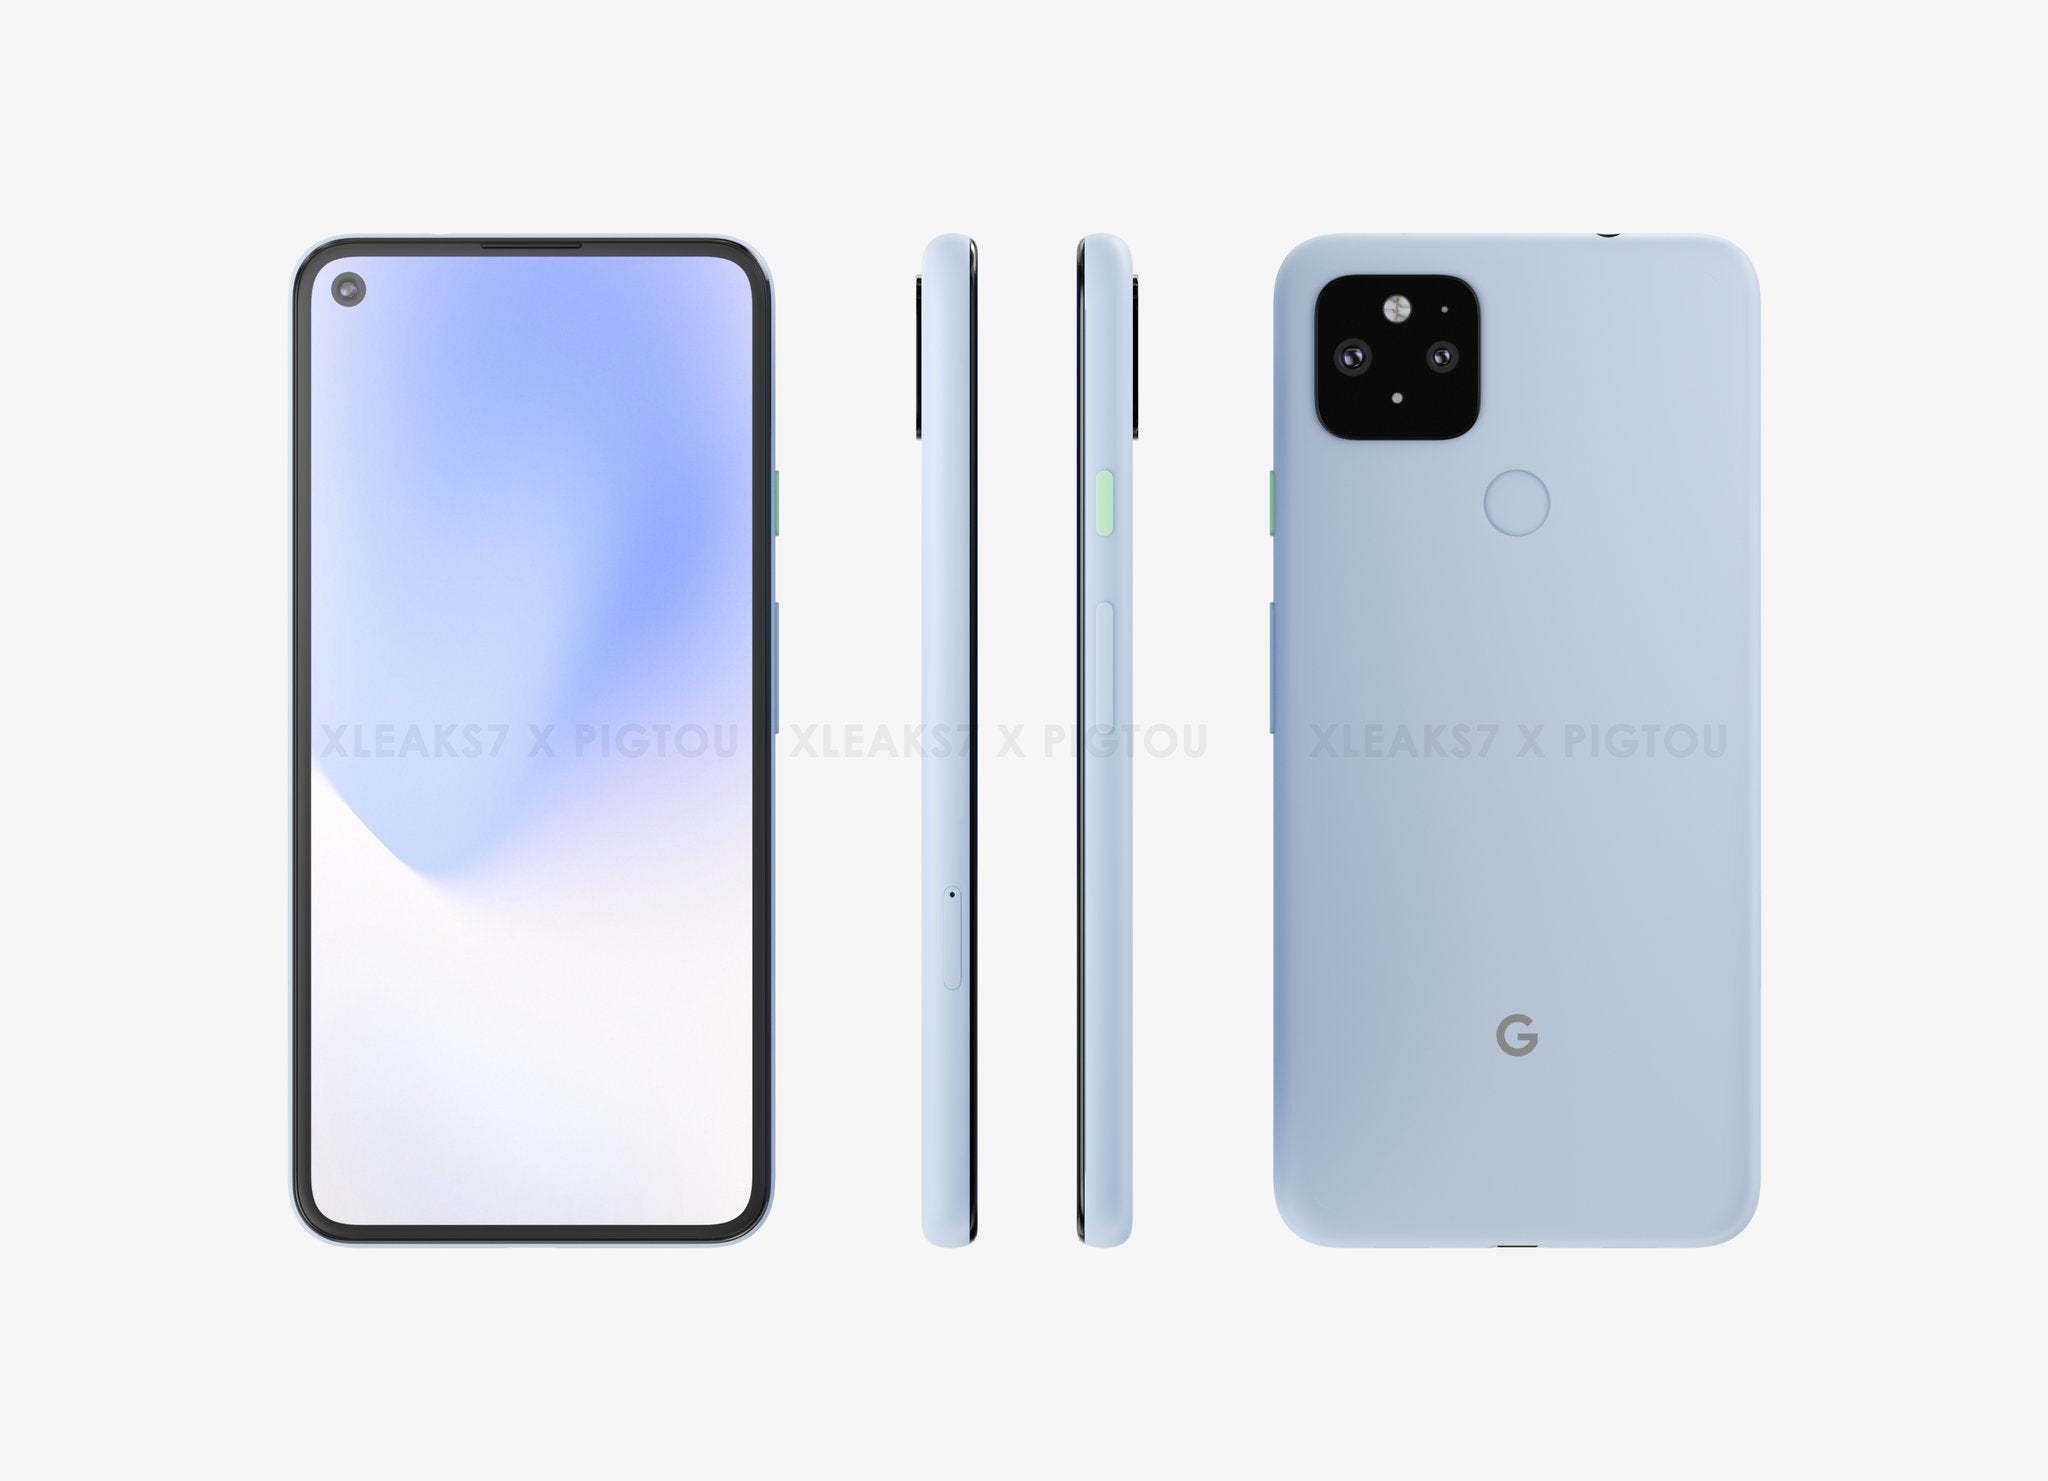 Google Pixel 4a (5G) CAD-based render - Here's when the Google Pixel 5 & Pixel 4a (5G) could be announced